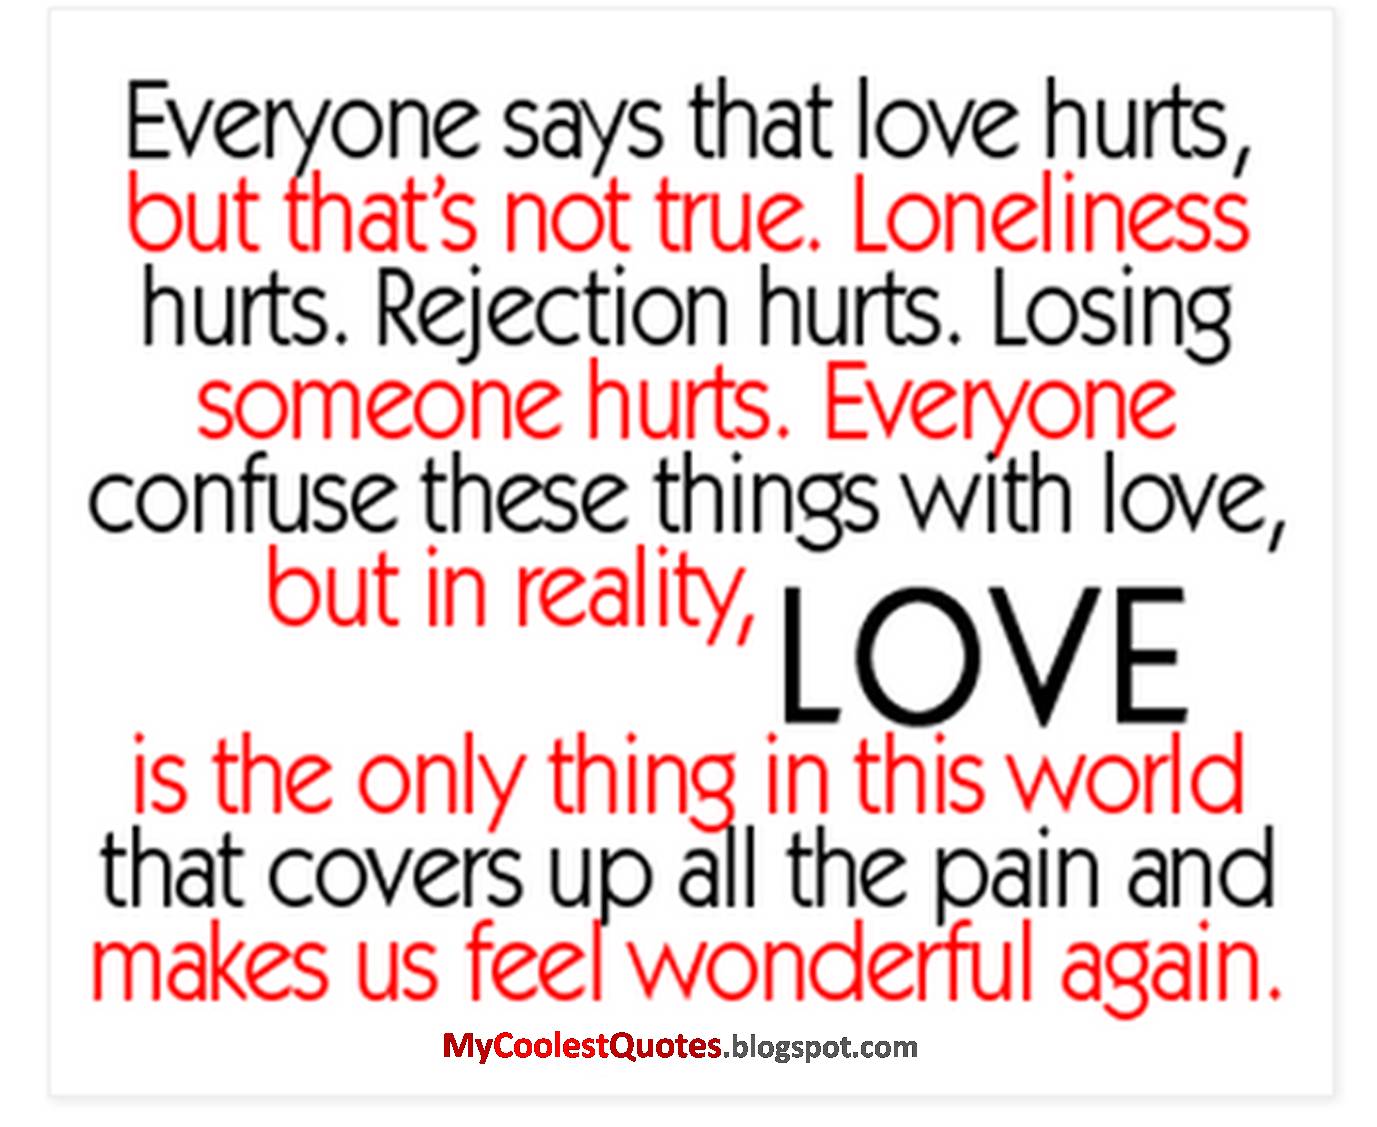 love hurt quotes | Famous Quotes of the Day